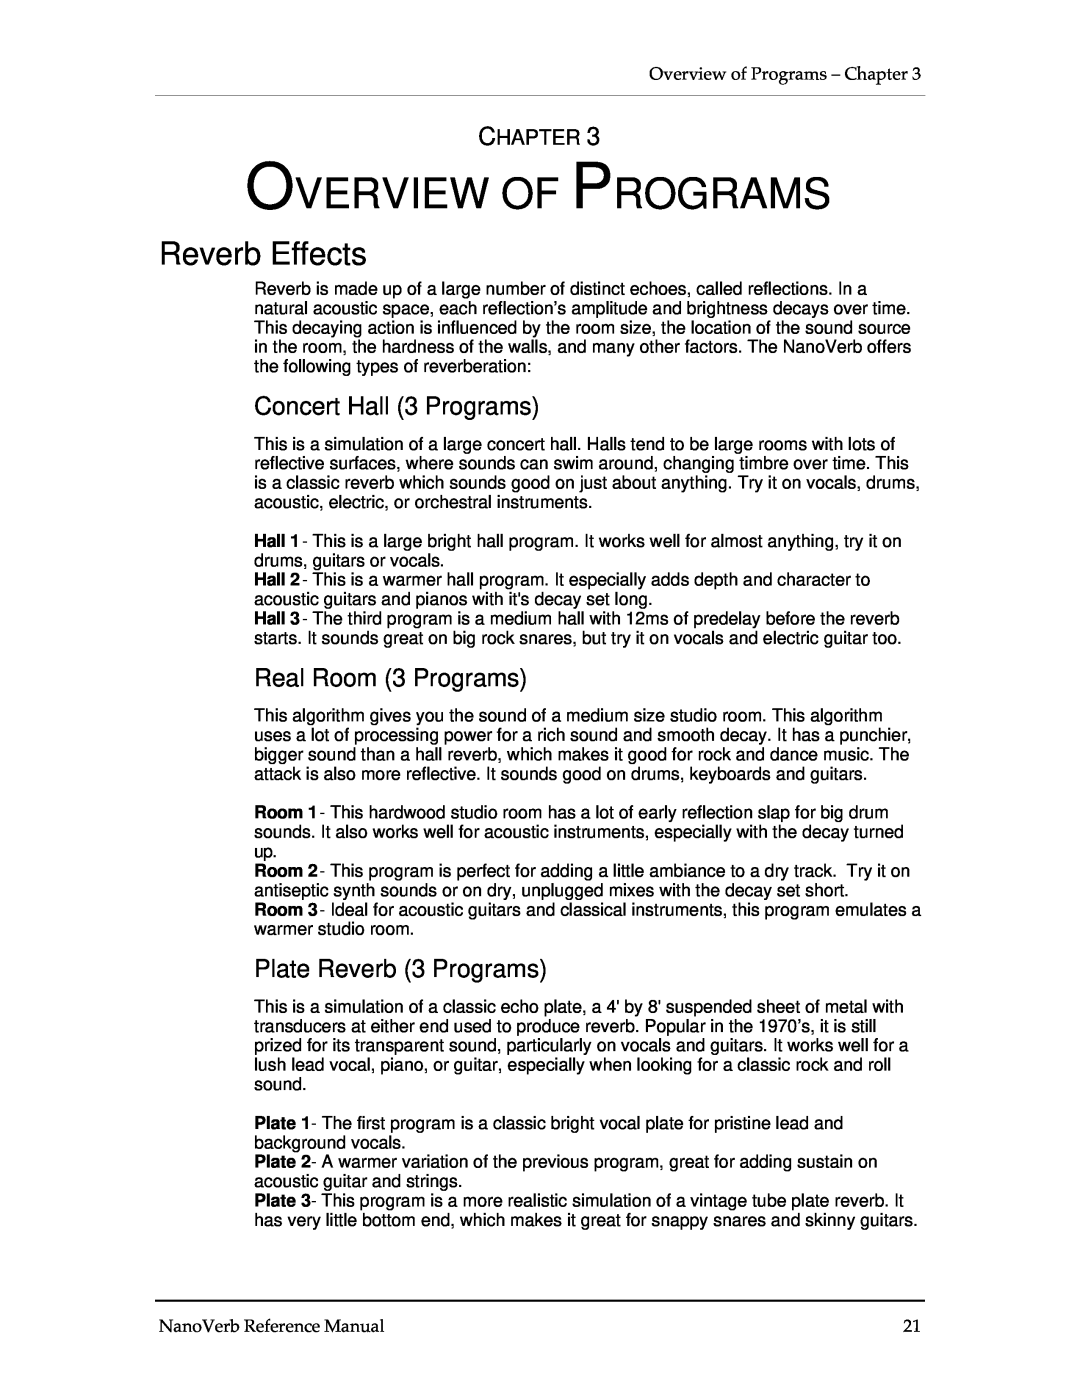 Alesis Stereo Amplifier manual Overview Of Programs, Reverb Effects, Concert Hall 3 Programs, Real Room 3 Programs, Chapter 